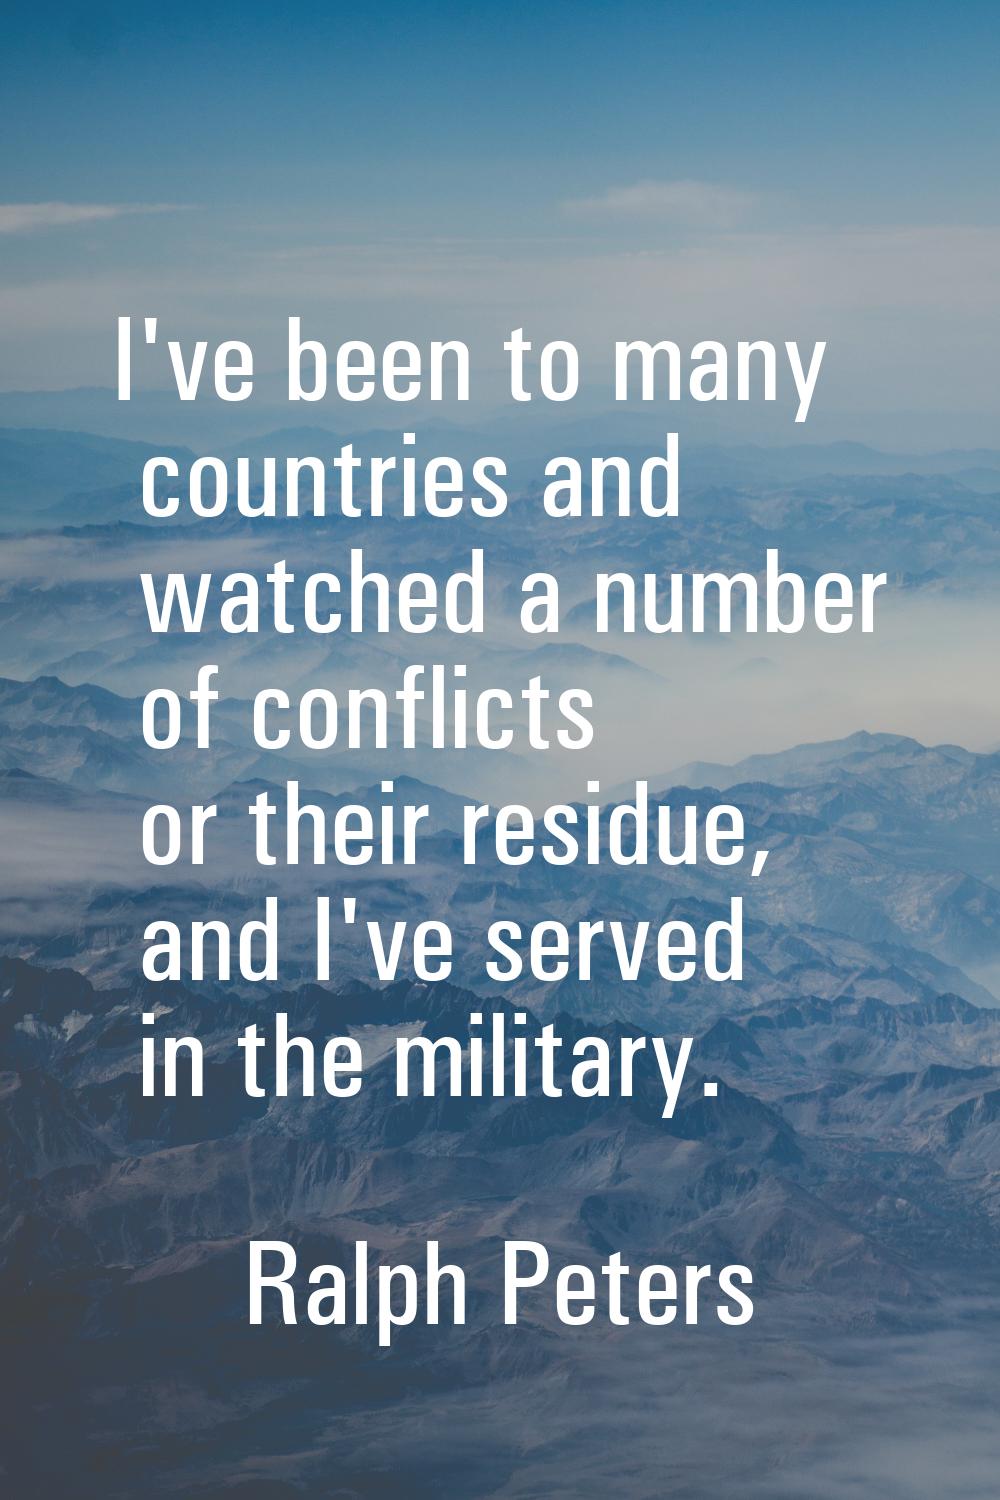 I've been to many countries and watched a number of conflicts or their residue, and I've served in 